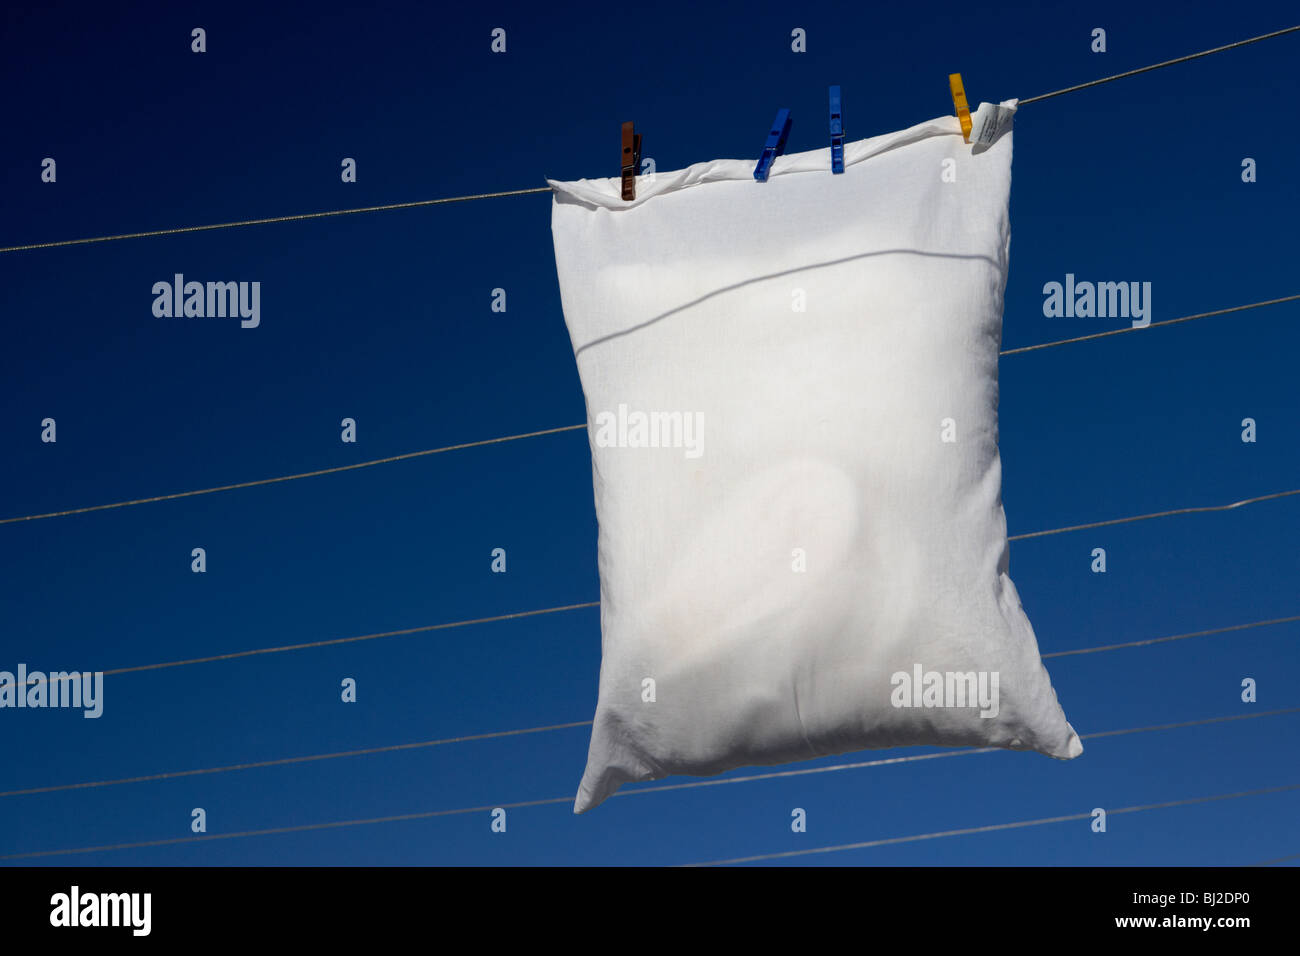 single pillow hanging on a washing line with blue sky Stock Photo